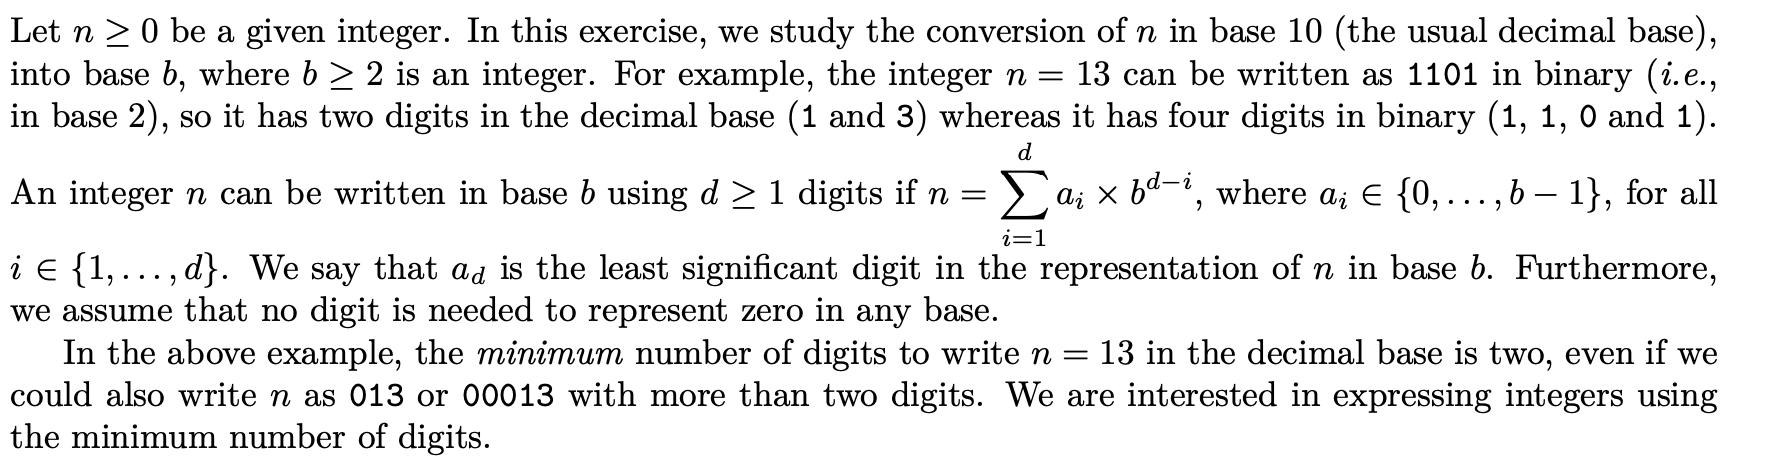 Let n  0 be a given integer. In this exercise, we study the conversion of n in base 10 (the usual decimal